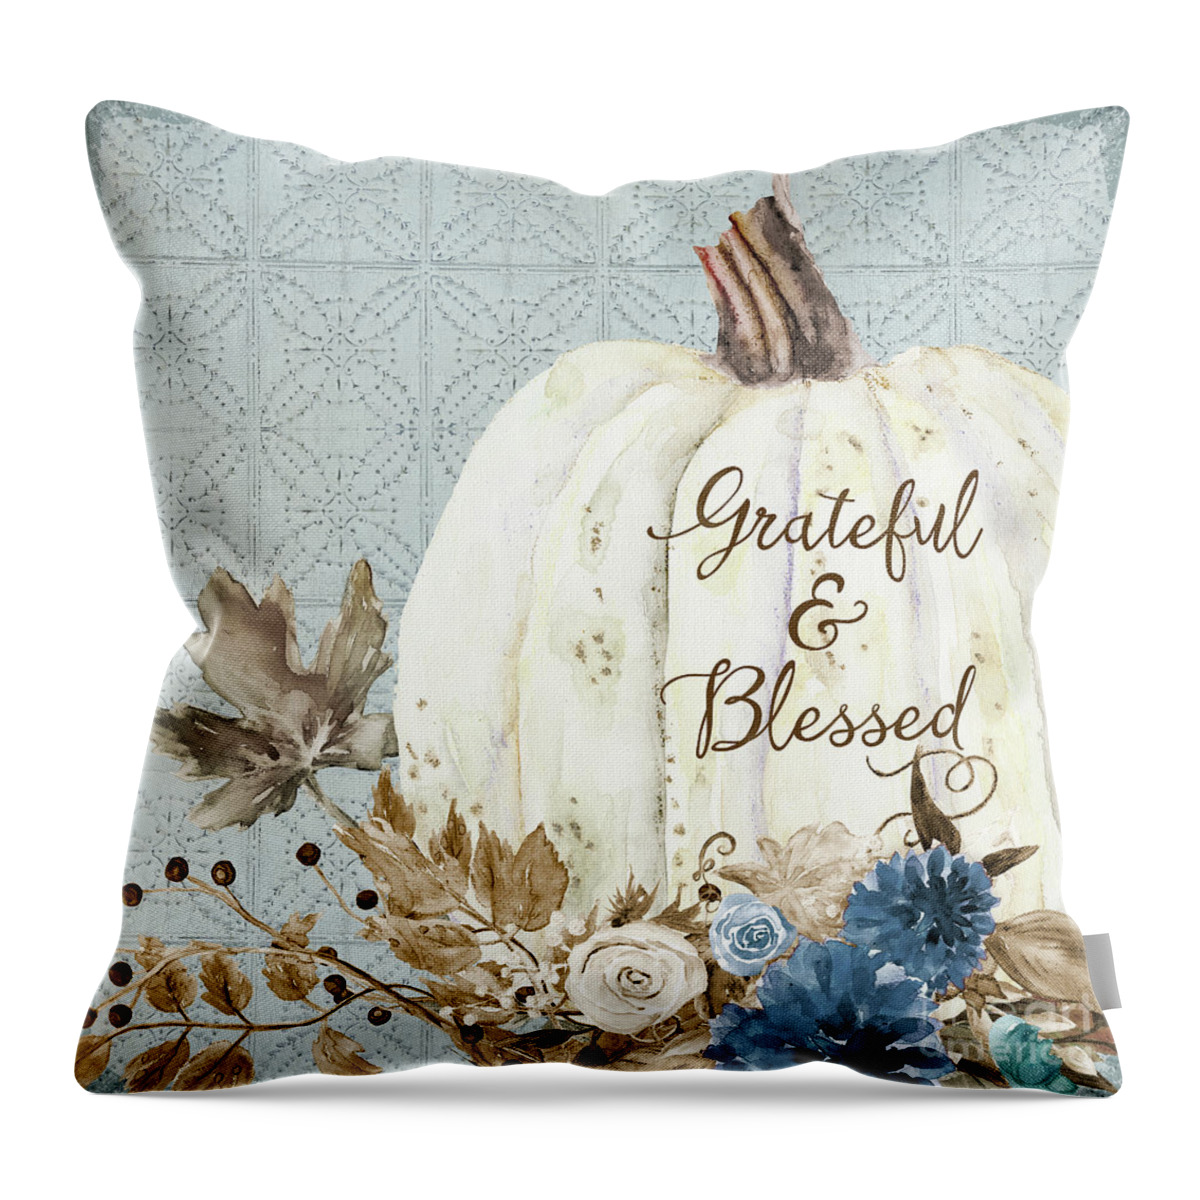 Fall Autumn Harvest Throw Pillow featuring the painting Fall Autumn White Pumpkin Grateful and Blessed Watercolor Dusty Blue Navy Brown by Audrey Jeanne Roberts